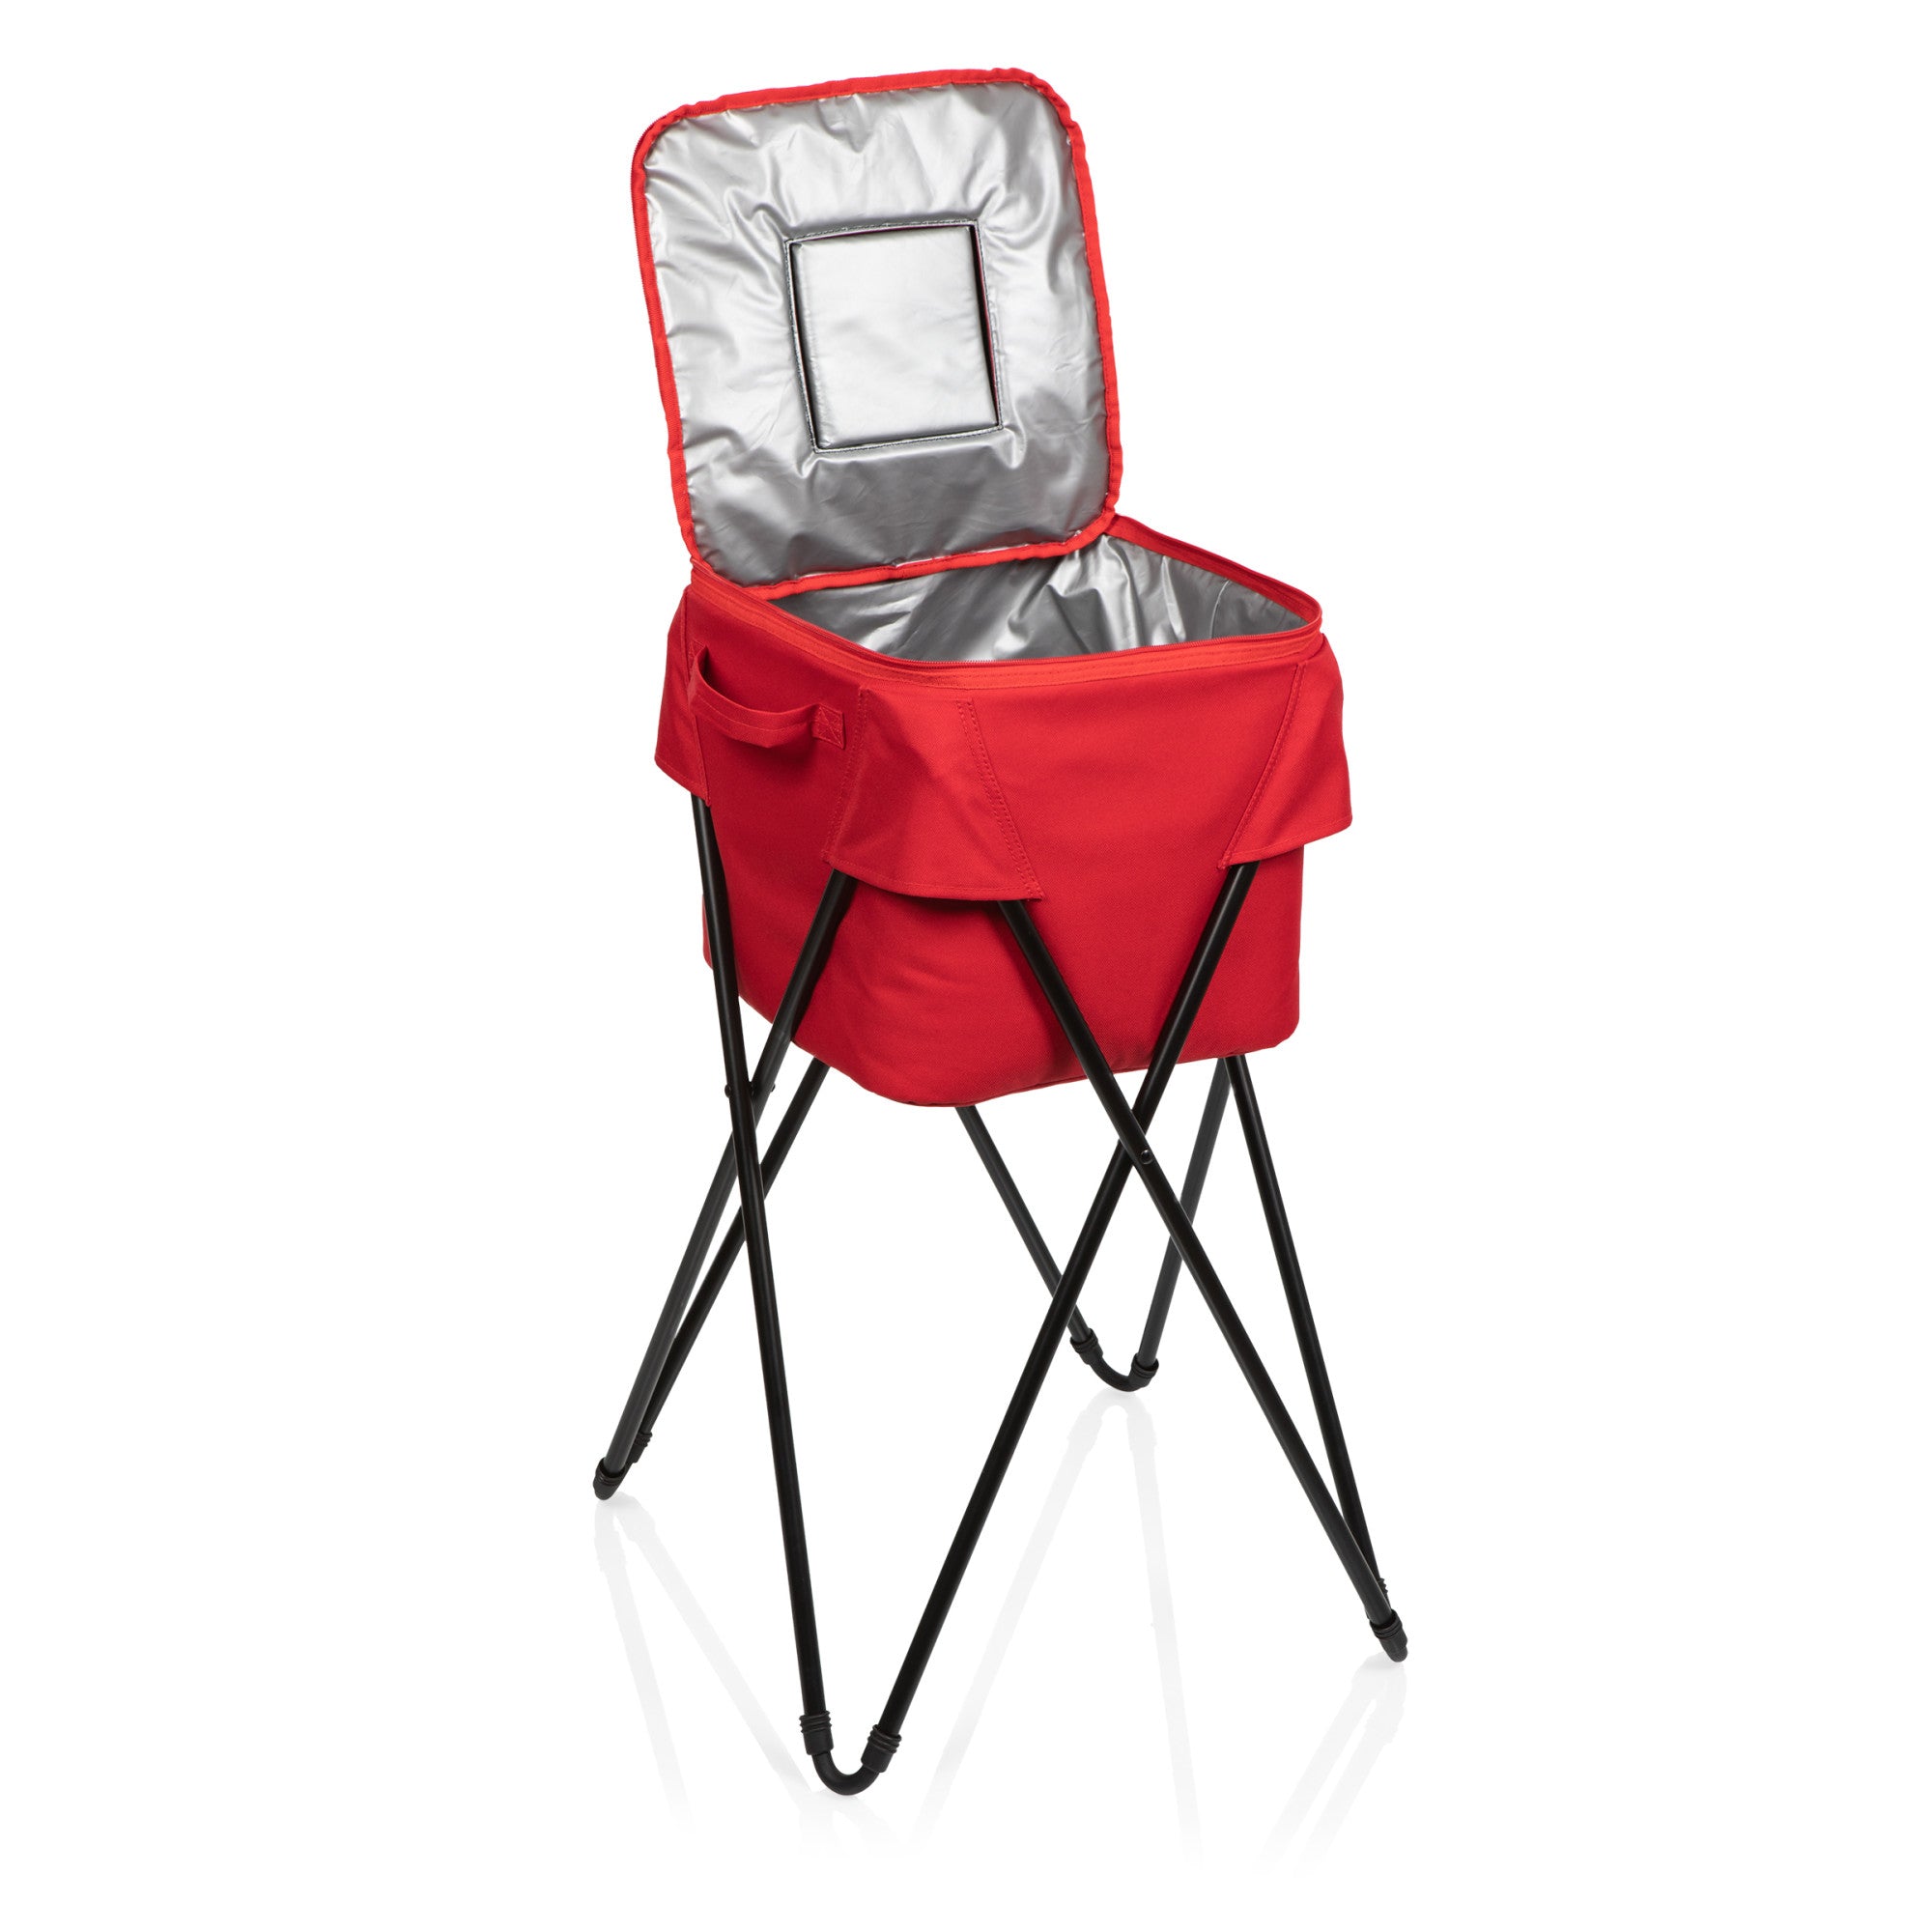 Camping Party Cooler with Stand - Convenient & Spacious for